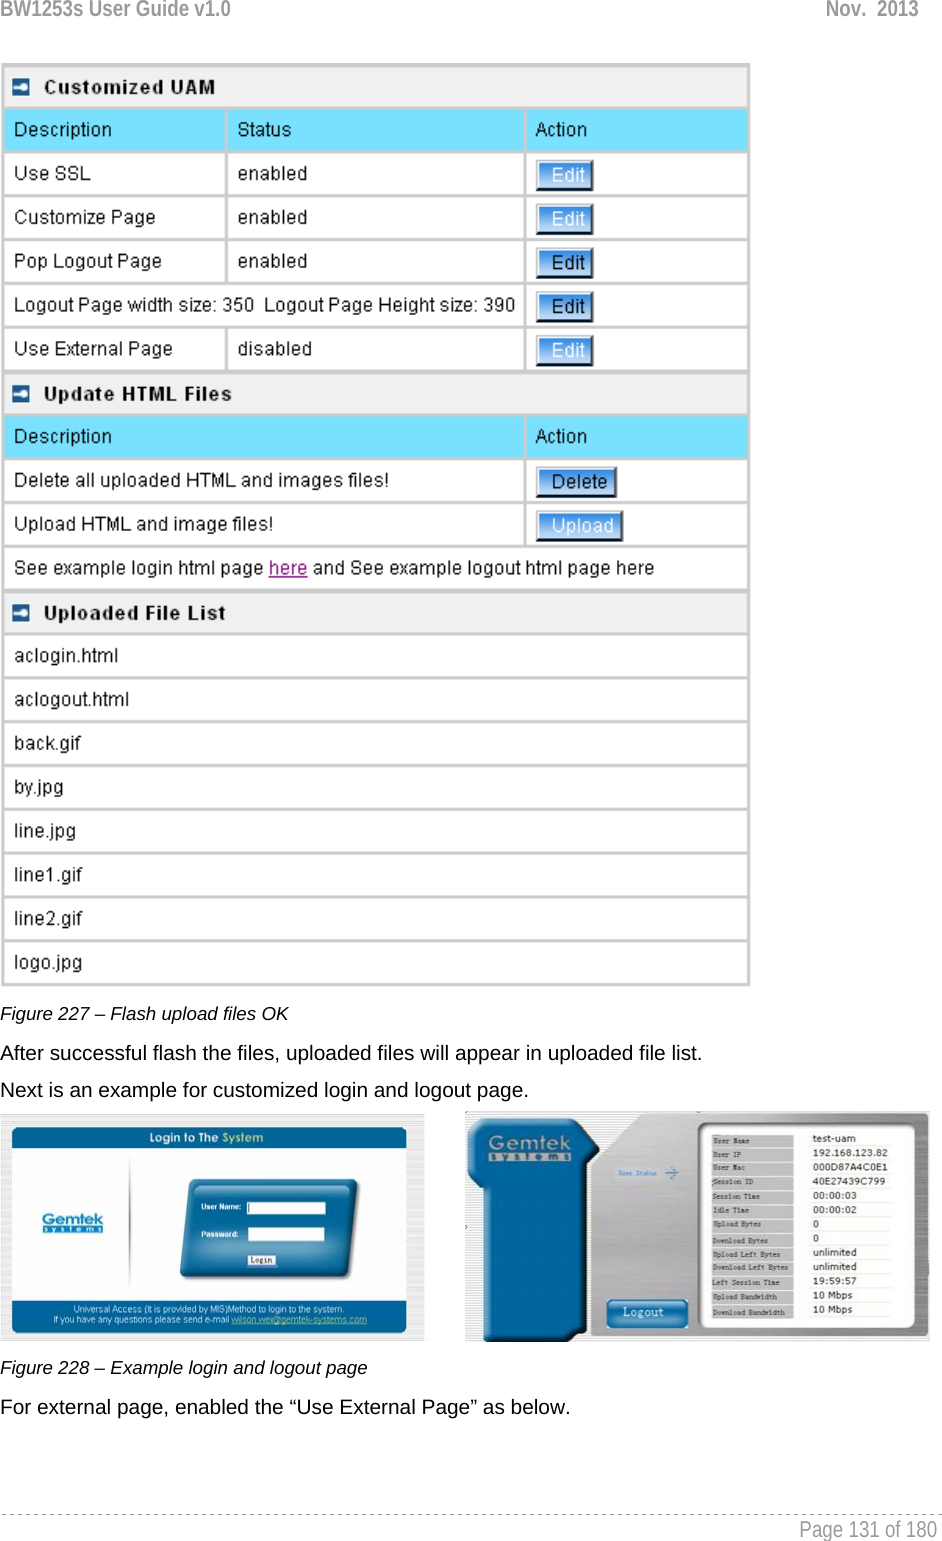 BW1253s User Guide v1.0  Nov.  2013     Page 131 of 180    Figure 227 – Flash upload files OK After successful flash the files, uploaded files will appear in uploaded file list. Next is an example for customized login and logout page.  Figure 228 – Example login and logout page For external page, enabled the “Use External Page” as below. 